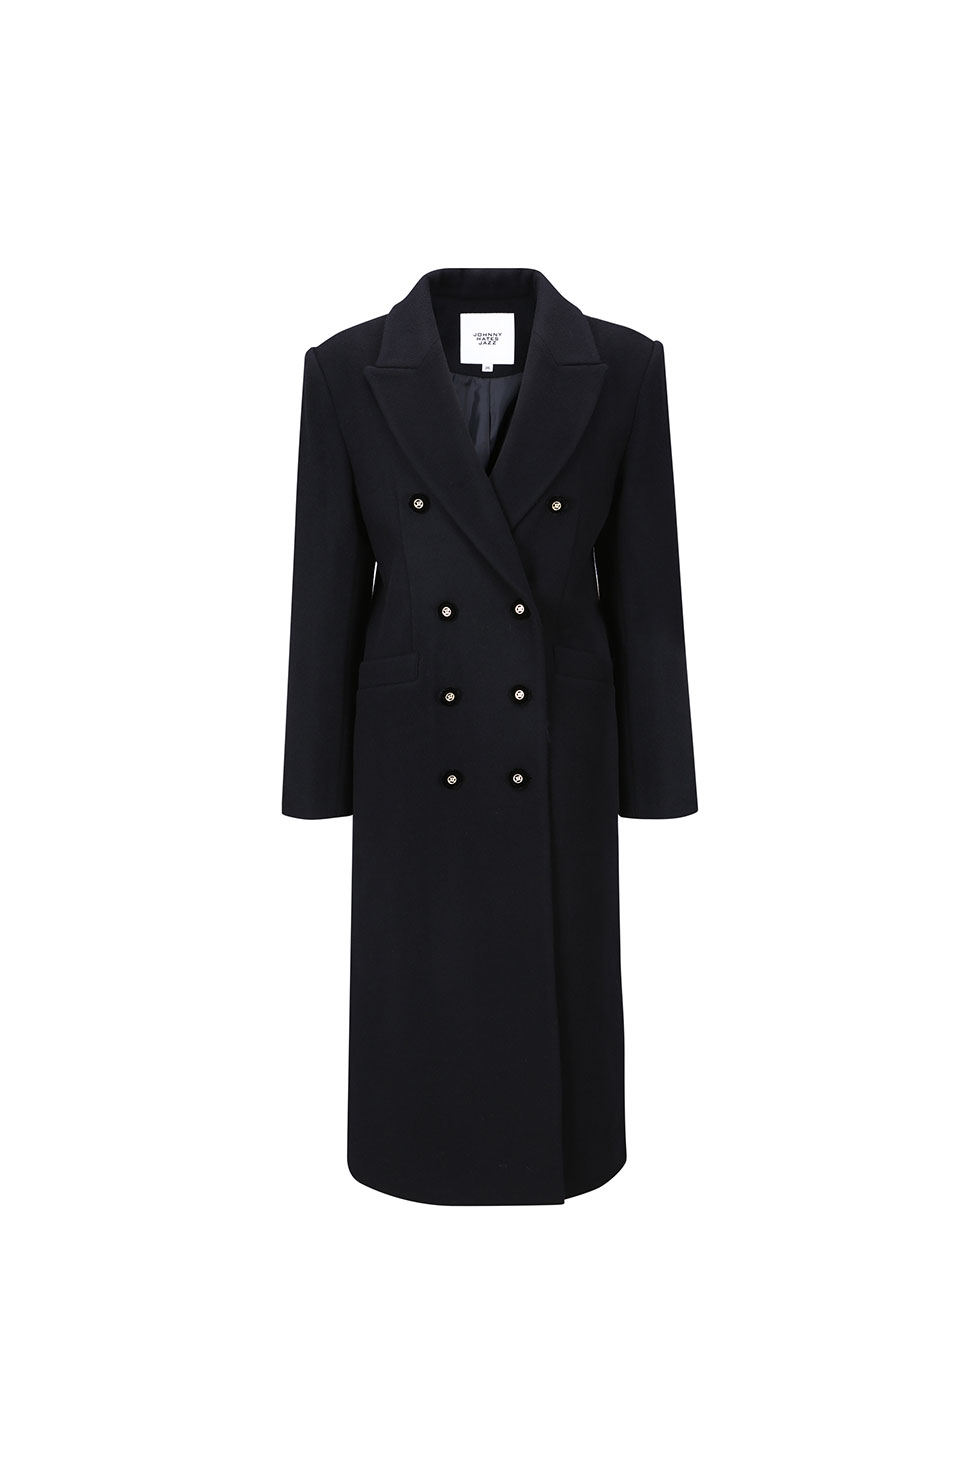 GOLD BUTTON DOUBLE COAT - NAVY